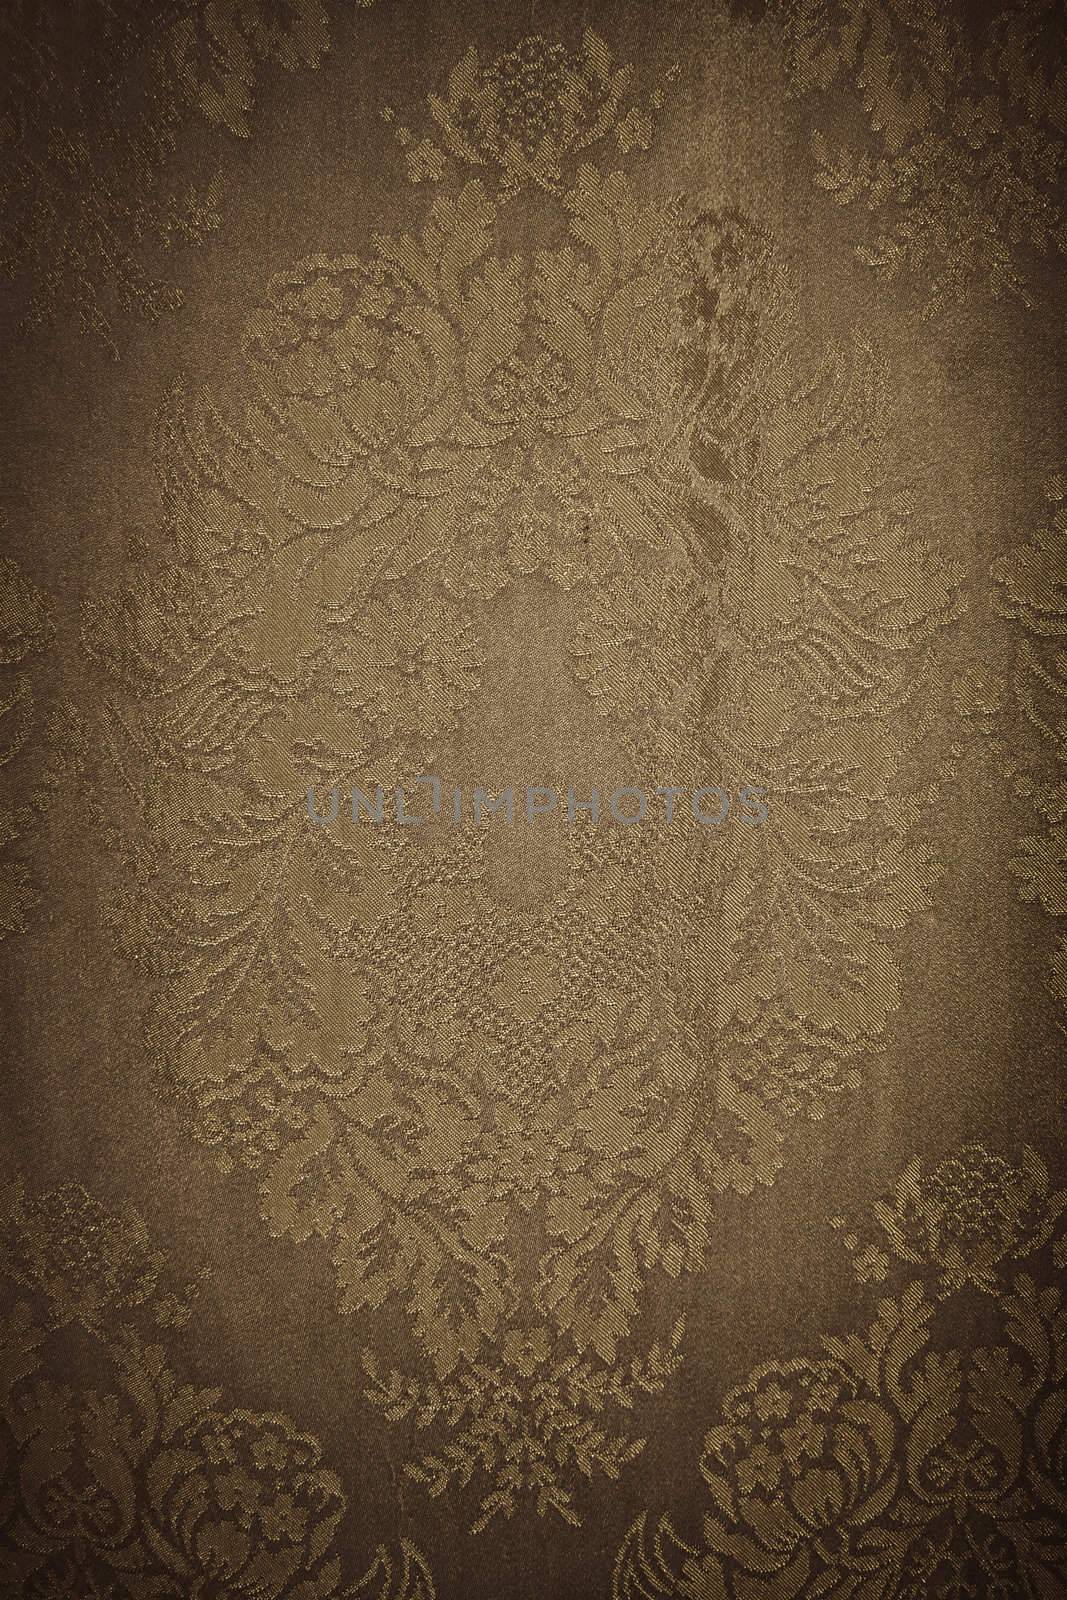 An image of a beautiful floral background